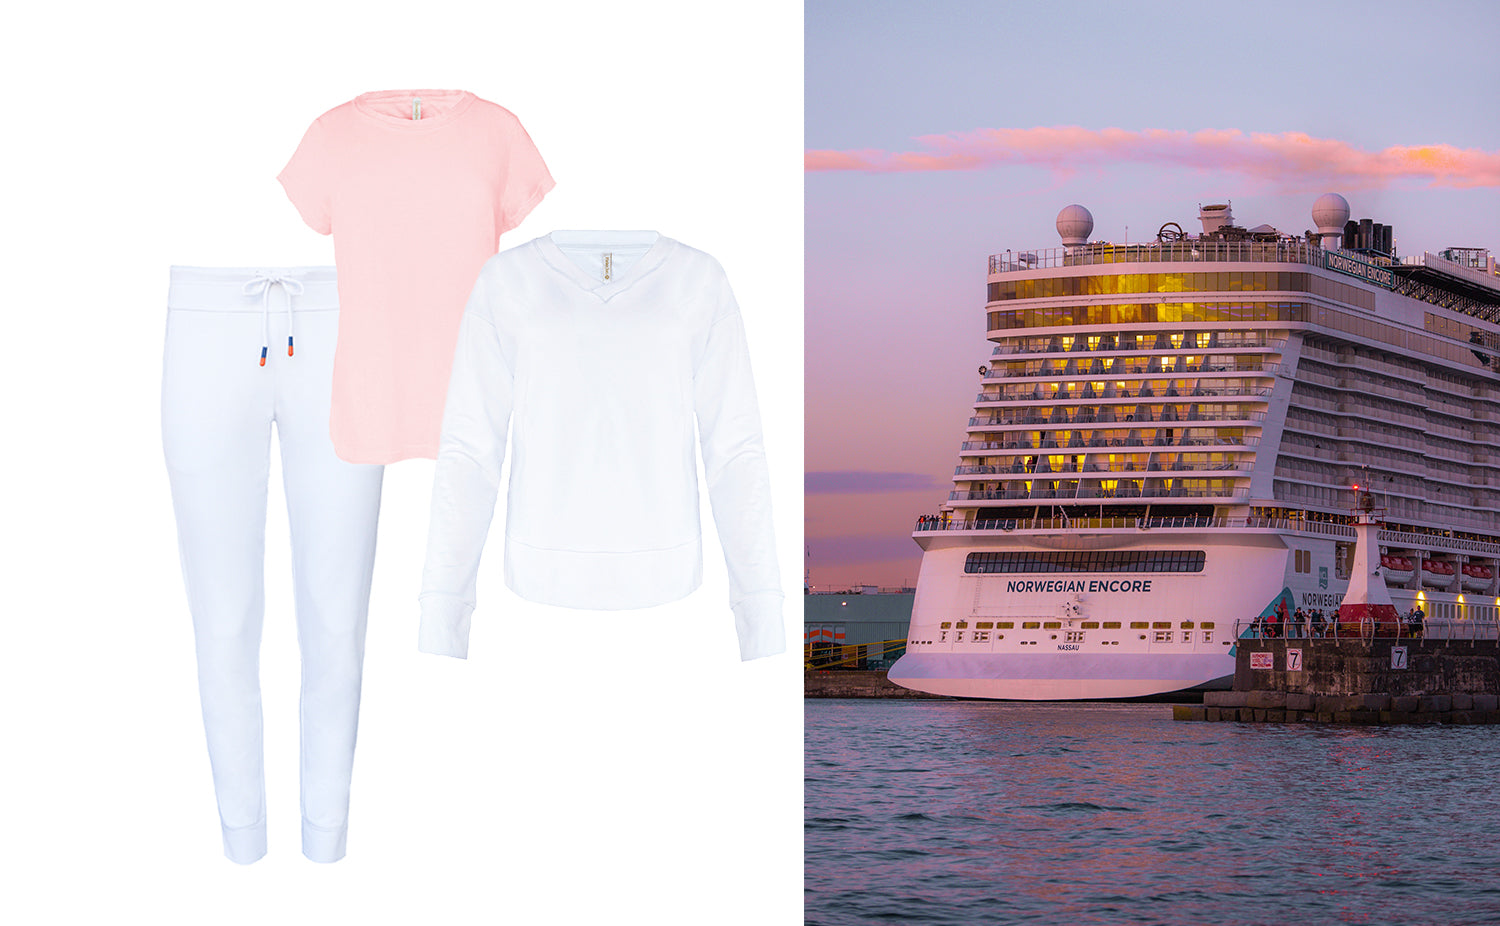 French Terry V-Neck Pullover and Joggers paired with a soft pink tee shirt a must have cruise wear set.